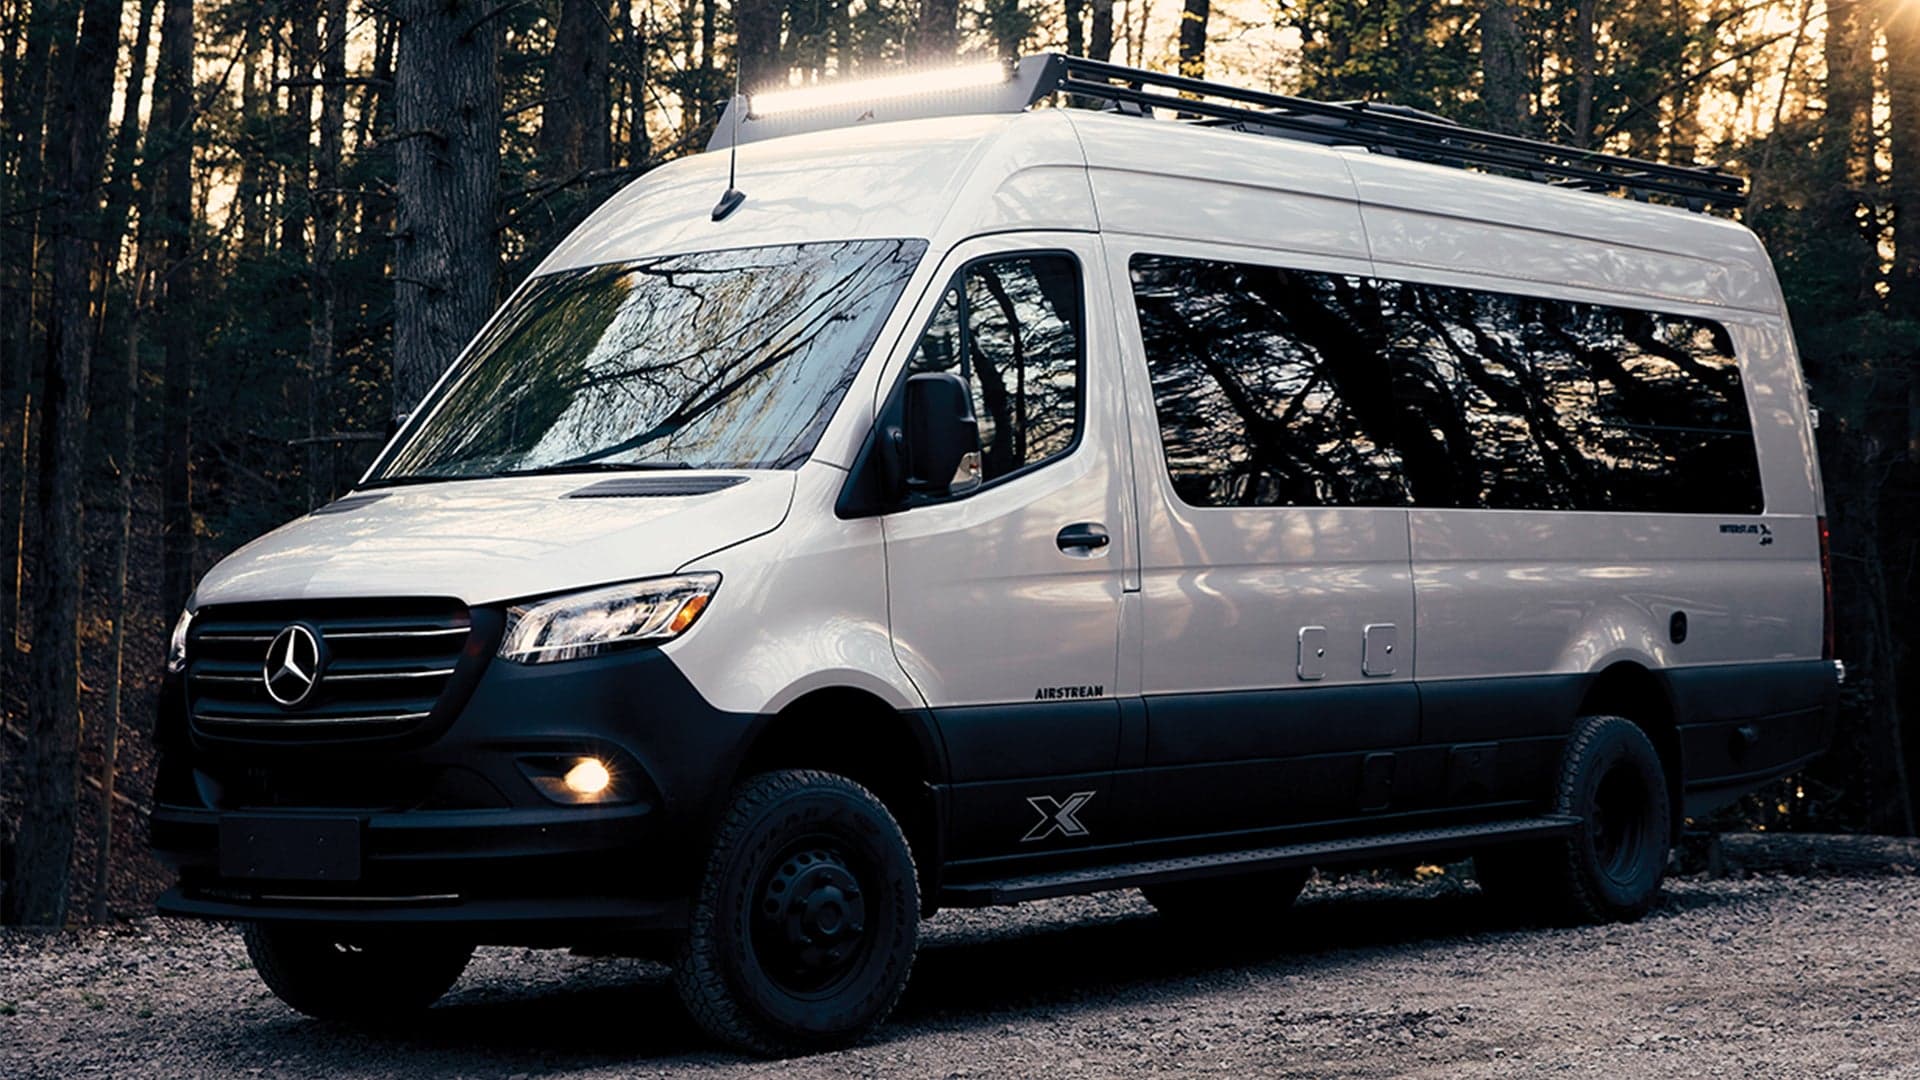 Airstream’s New Off-Road Camper Is a Dually 4×4 Sprinter Van on All-Terrains